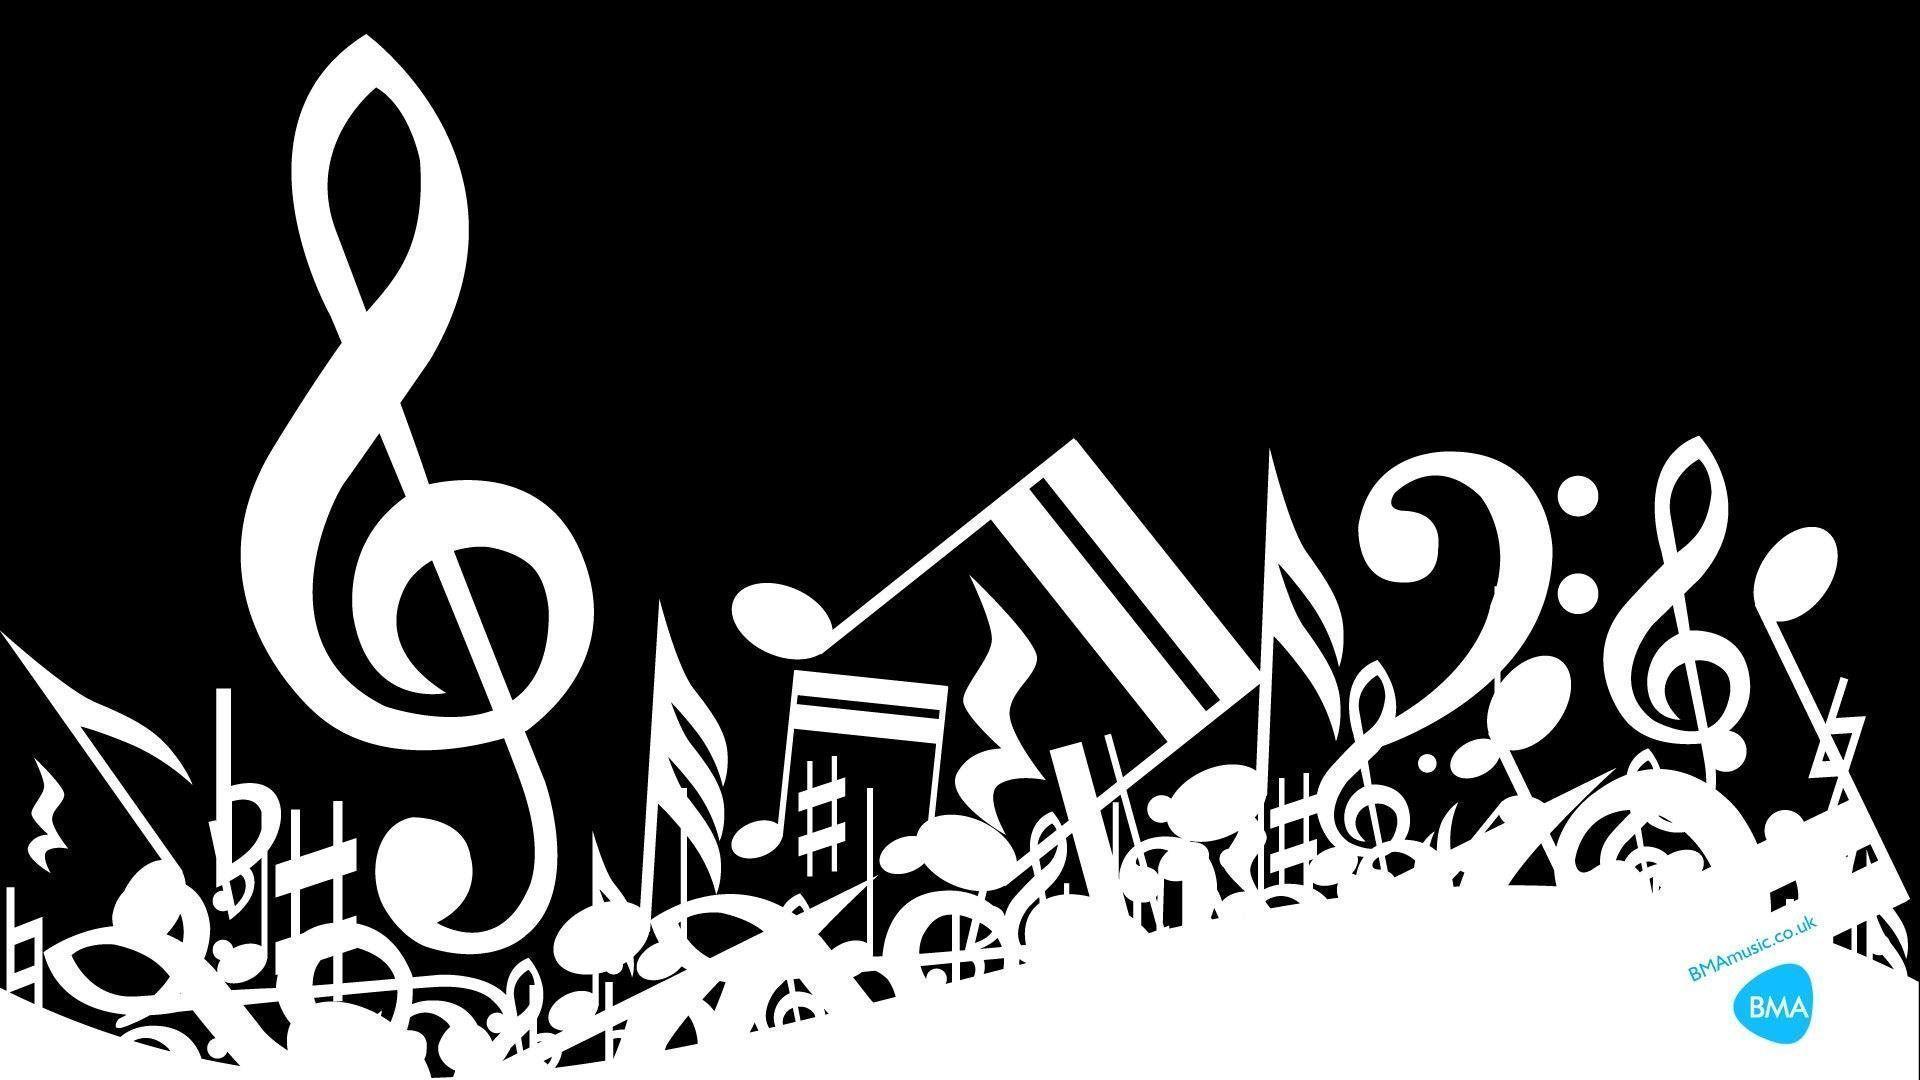 Black And White Treble Clef Musical Notes Wallpaper. Foolhardi